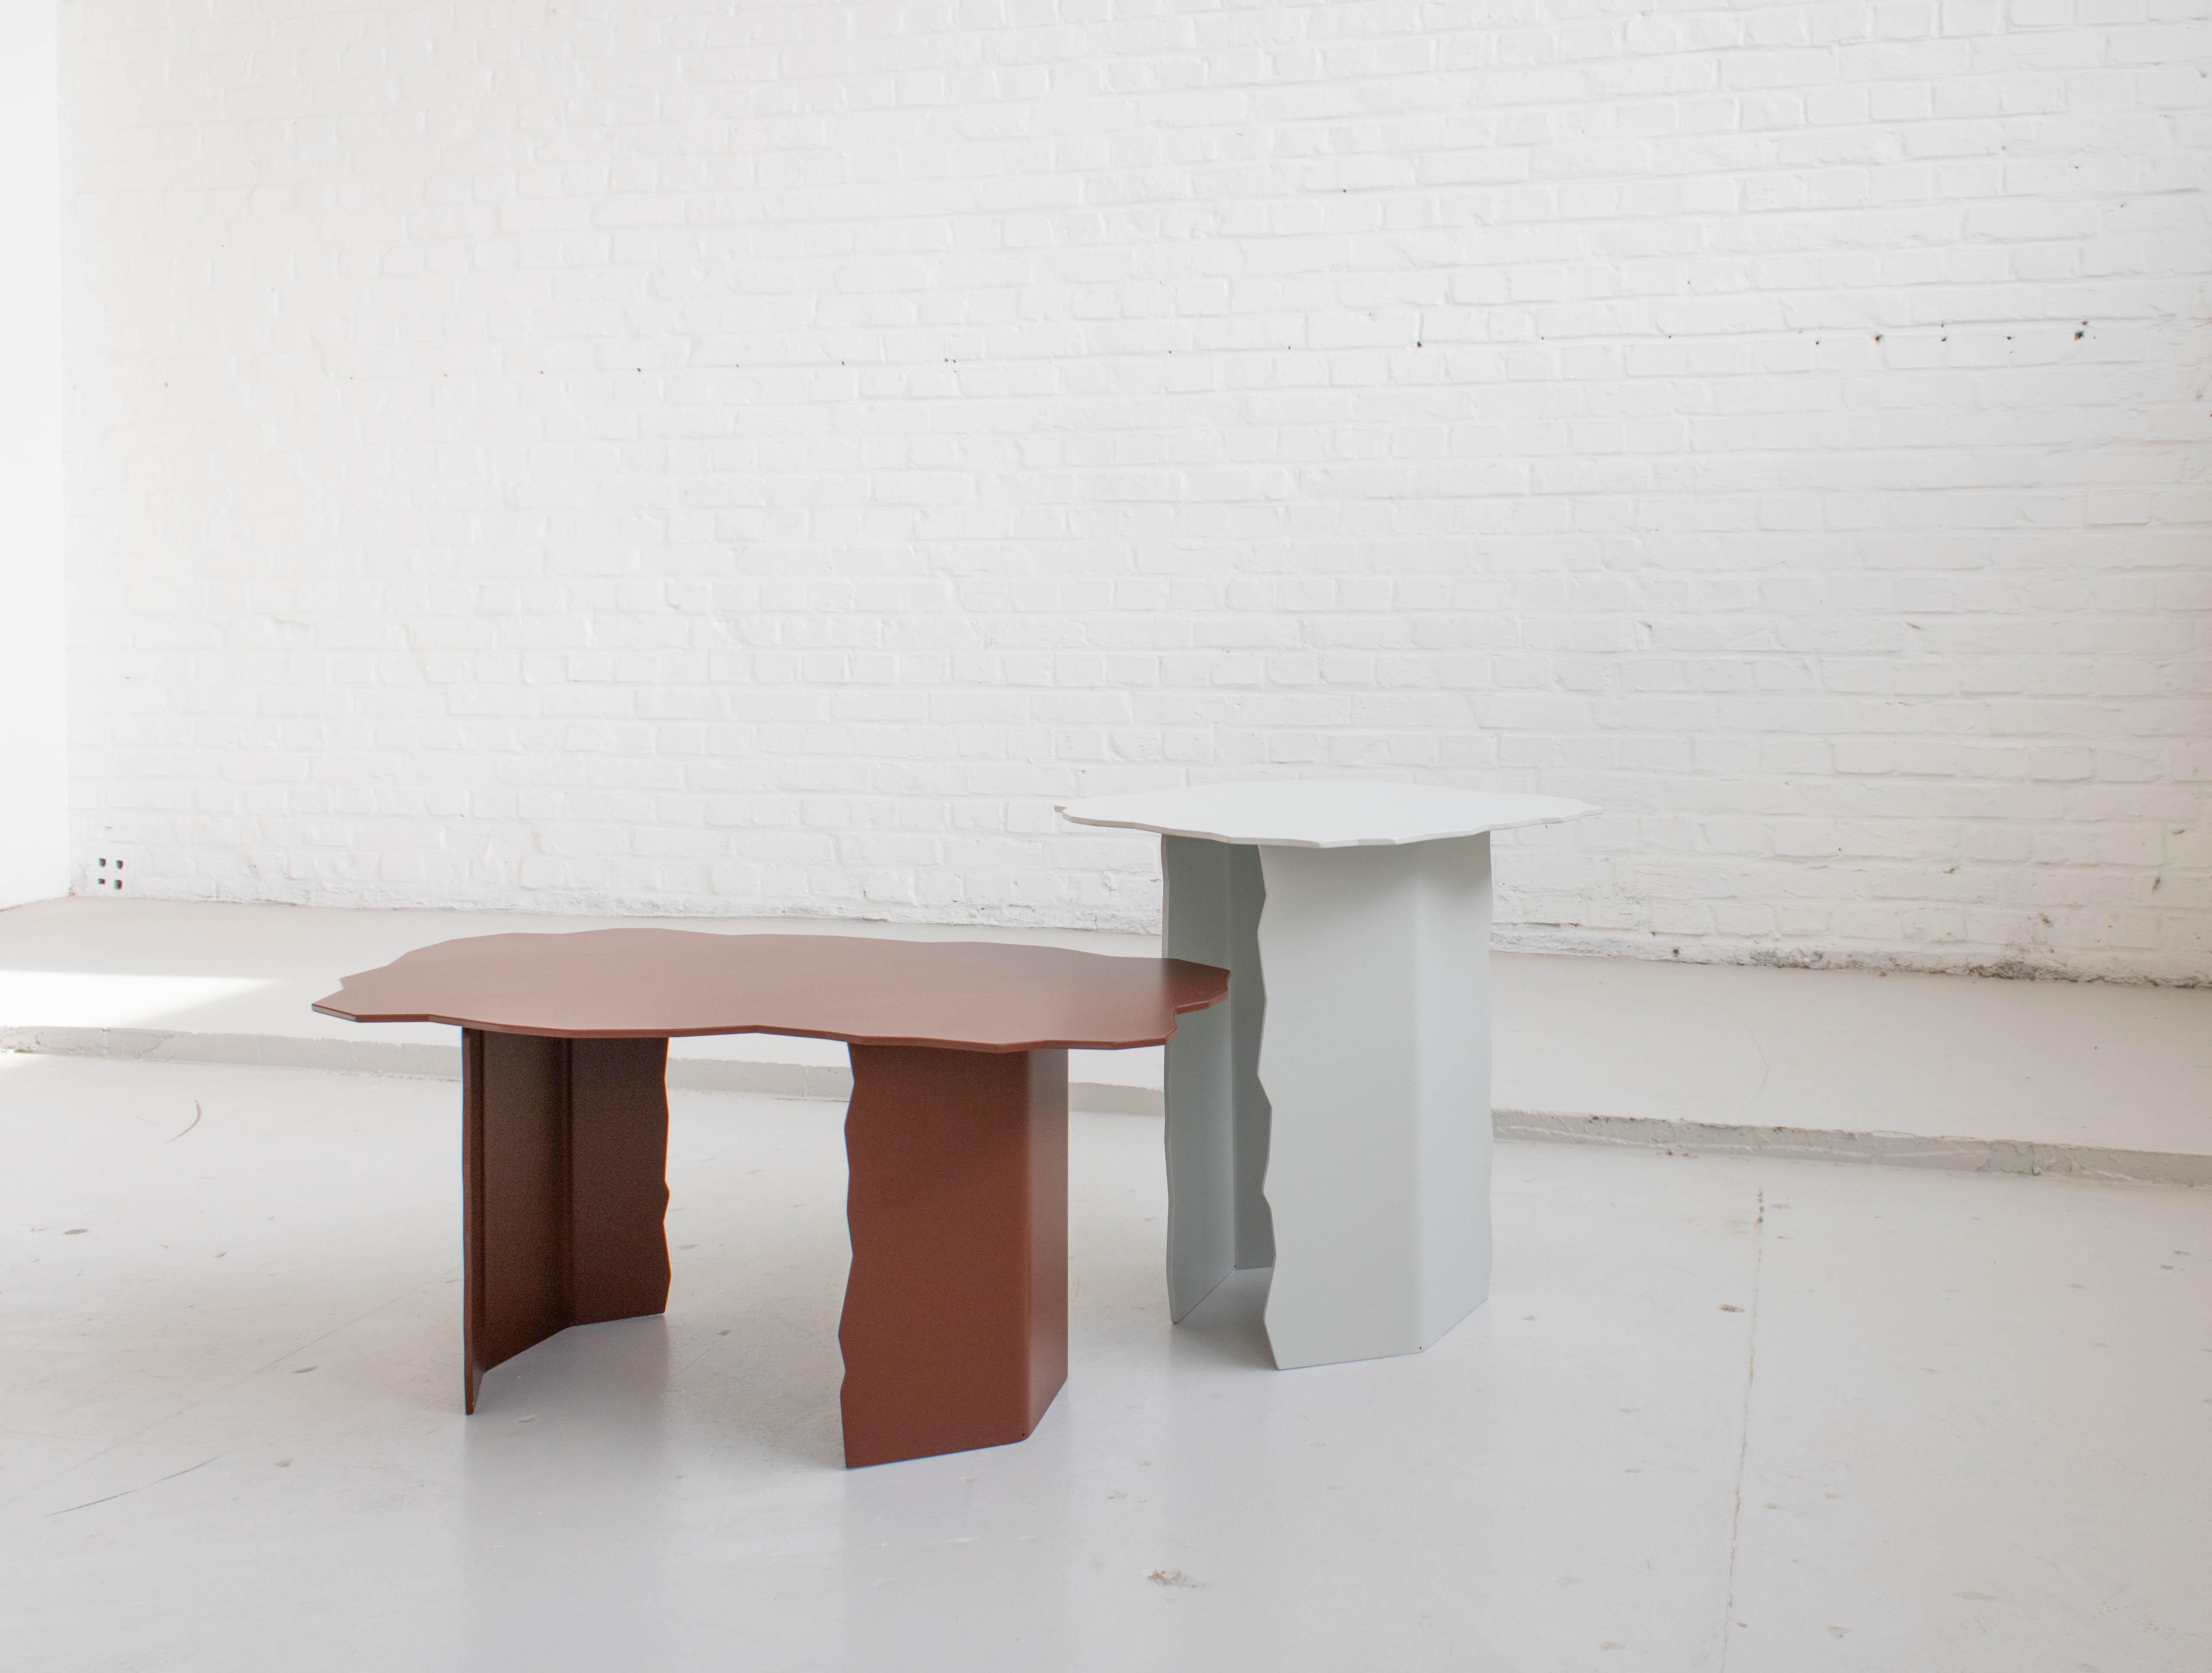 Set of 2 disrupt tables by Arne Desmet
Dimensions: D42 x W75 x H34 cm / D44 x W44 x H46
Materials: Powder coated aluminium.
Other colours available on request.

The shapes of the Disrupt tables are inspired by the jagged edges formed by earth